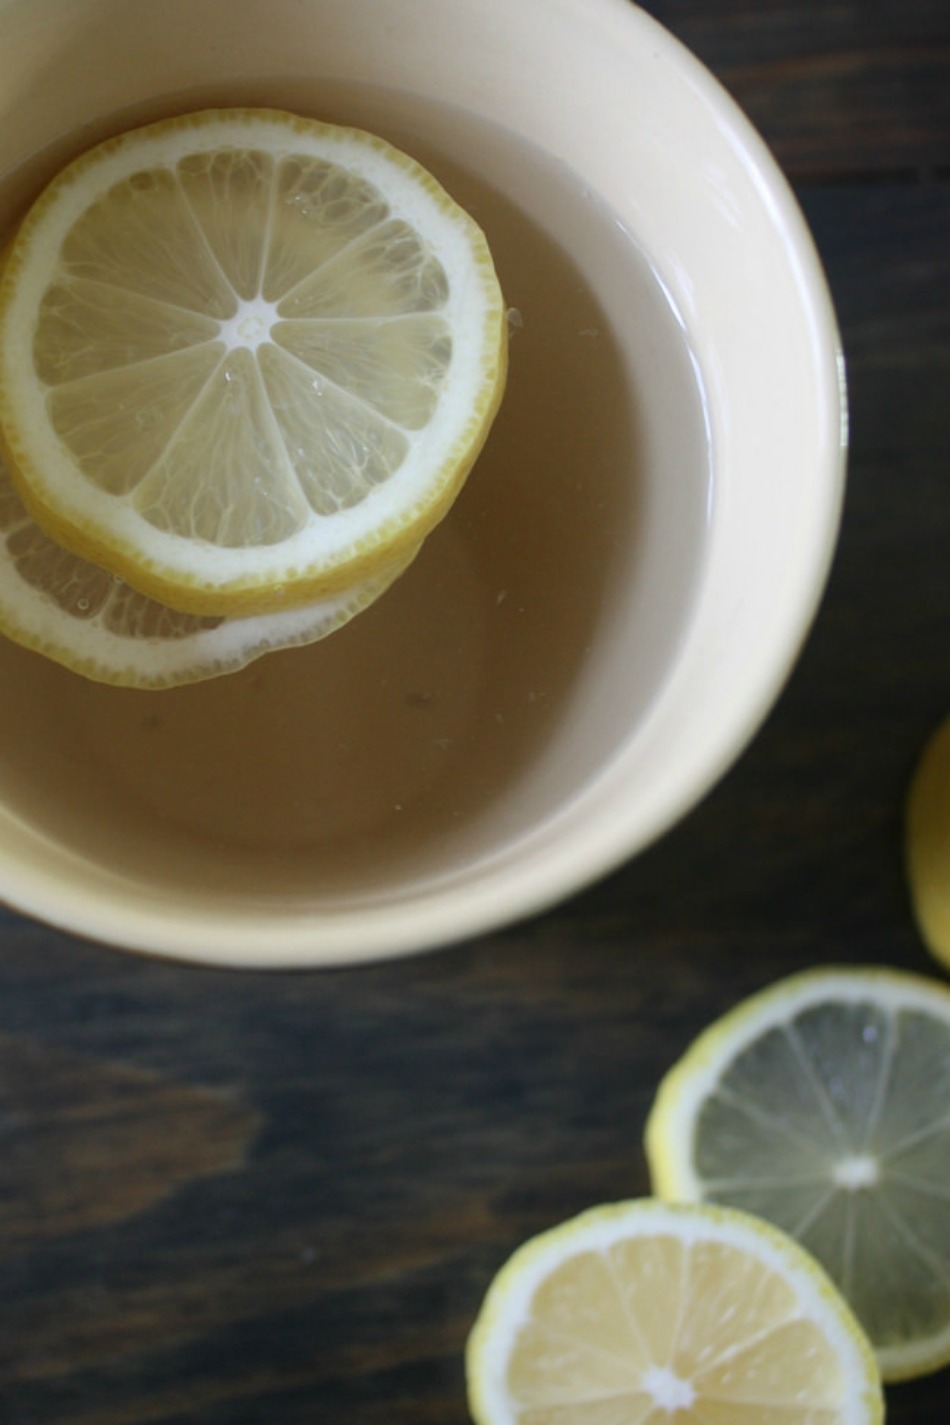 How To Use Lemon Ginger Tea To Nip A Cold In The Bud | Growing Up Herbal | Drink stimulating lemon ginger tea at the first sign of a cold to nip it in the bud!